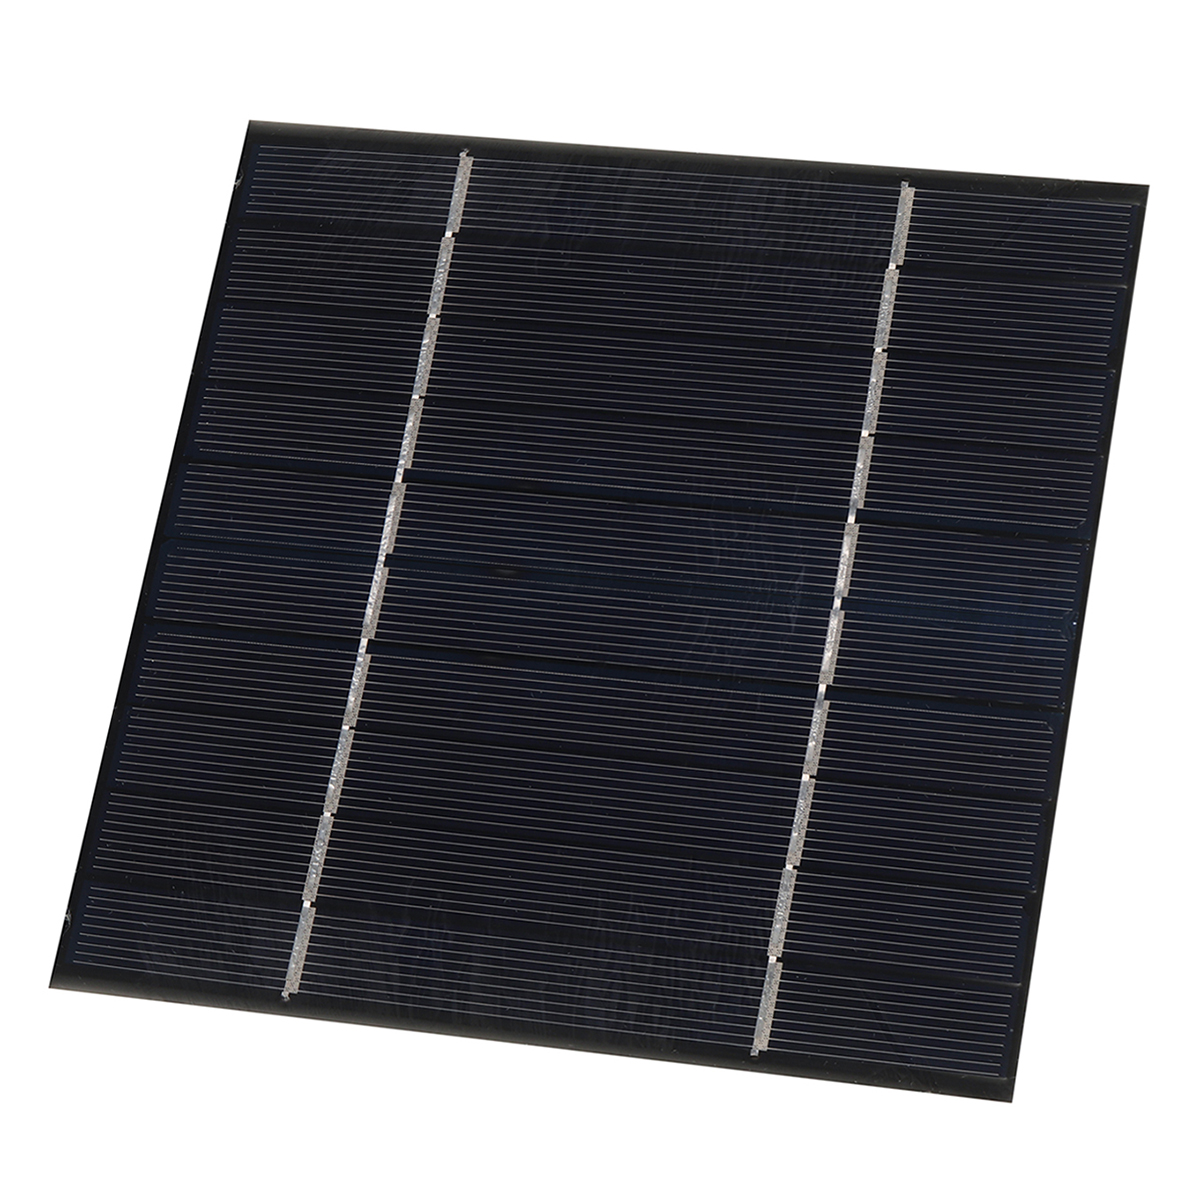 Portable-Solar-Power-Panel-1W-25W-35W-6V-USB-For-Battery-Cell-Phone-Charger-1932072-7